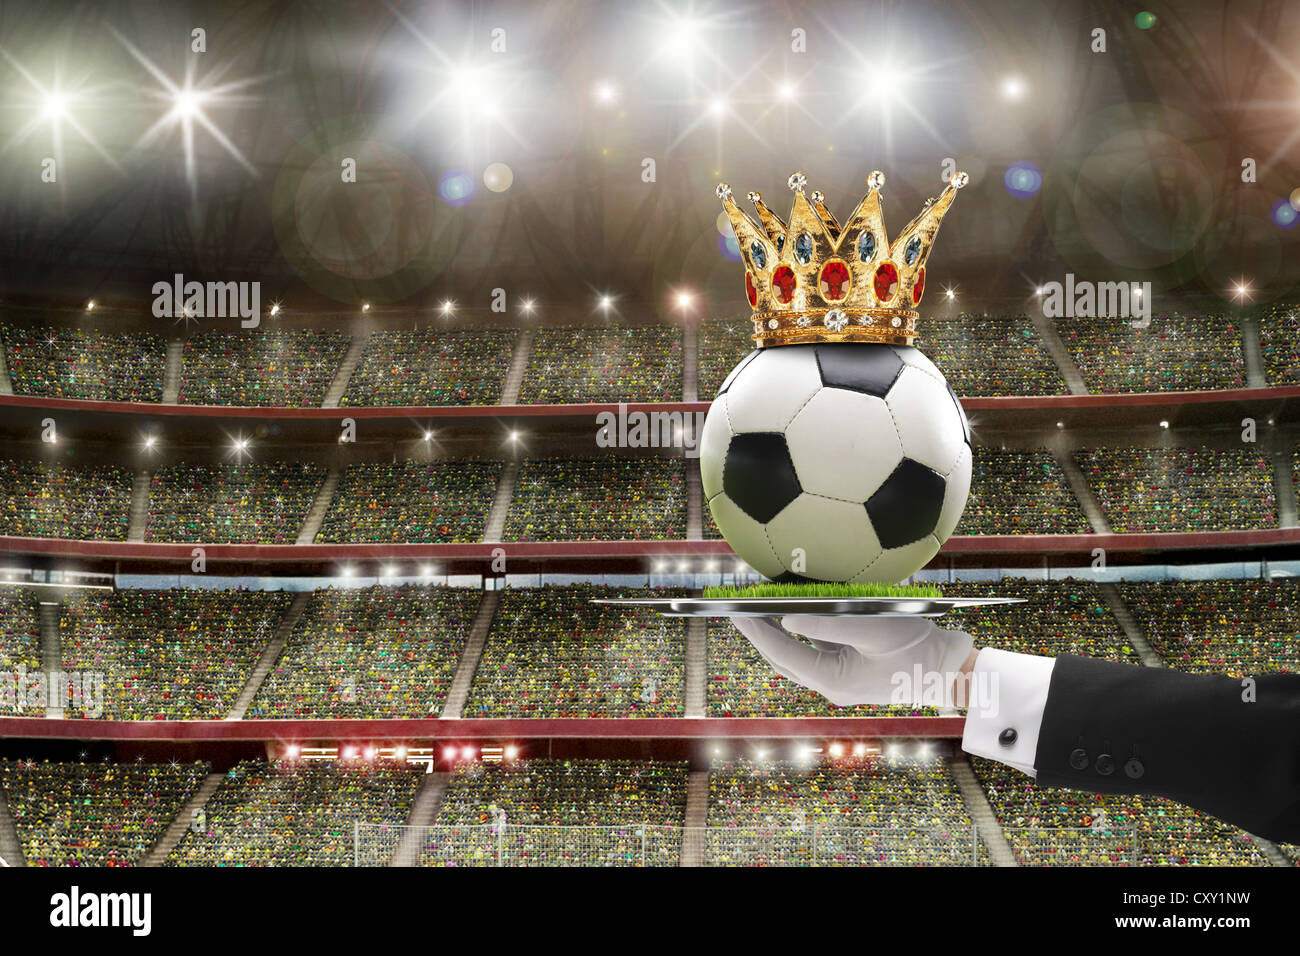 Football with a crown being held on a tray in a football stadium with spectator stands, illustration Stock Photo